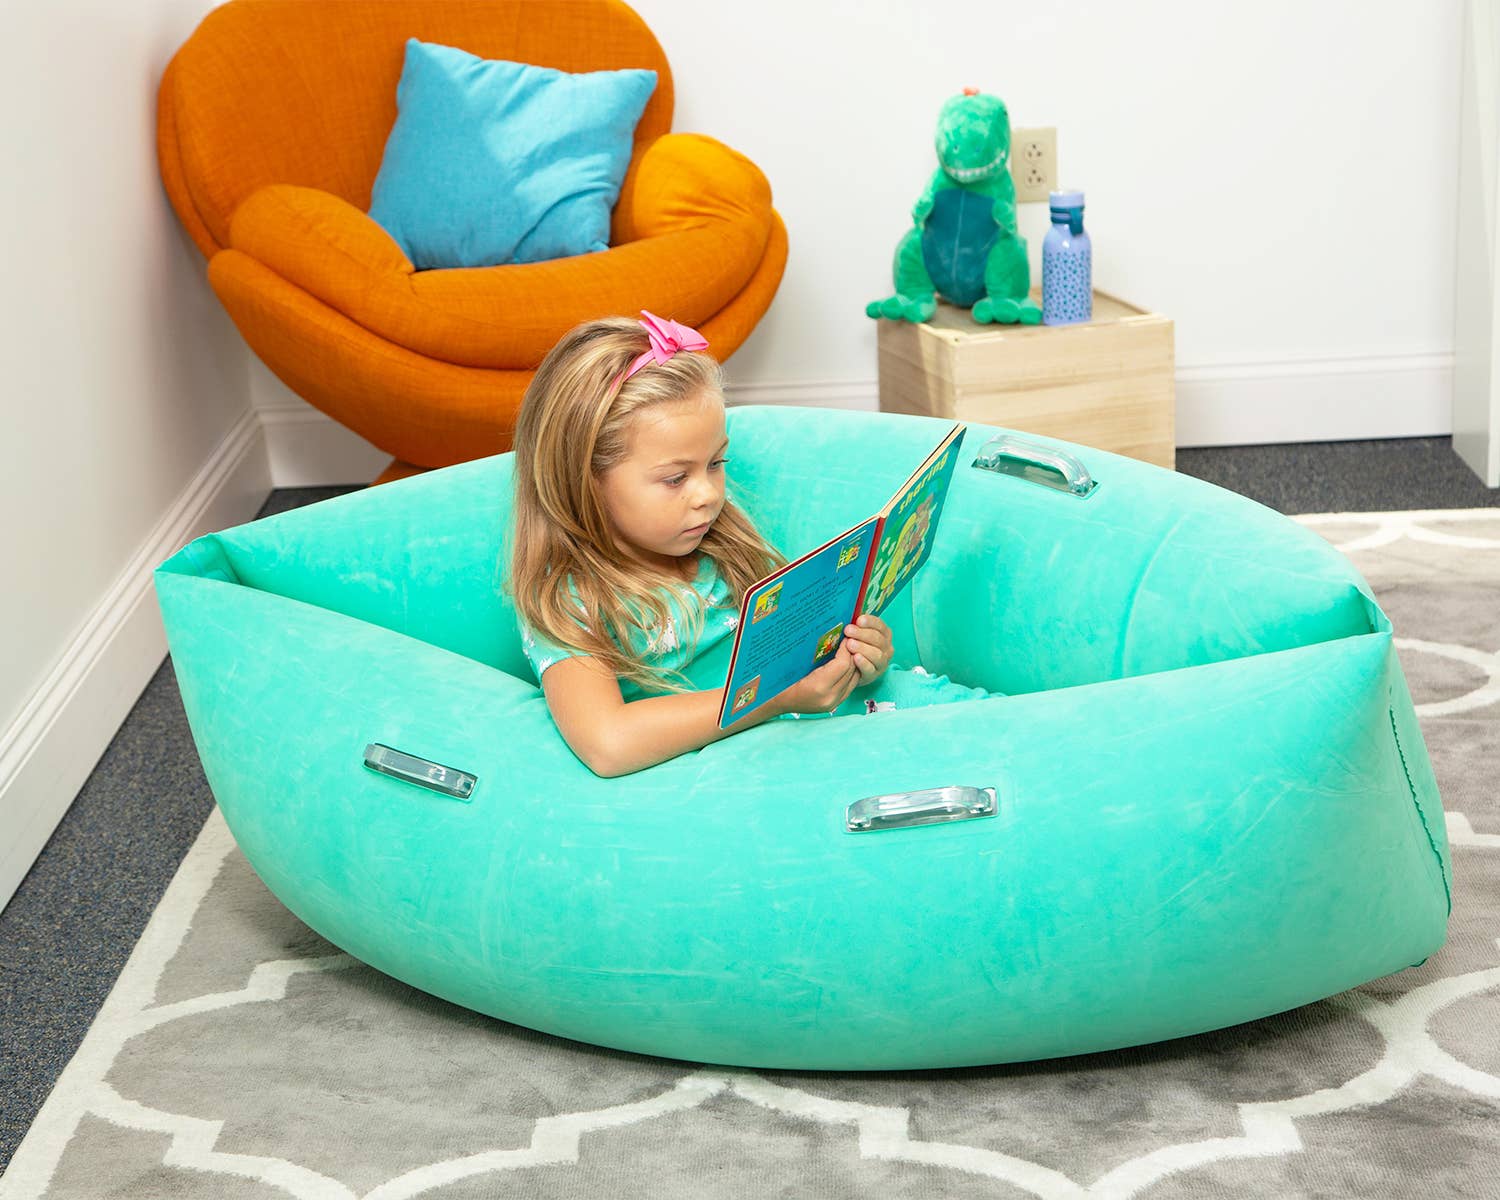 A child with light skin tone and long blonde hair is sitting in a light blue Peapod. They are leaning to the side and reading a book.